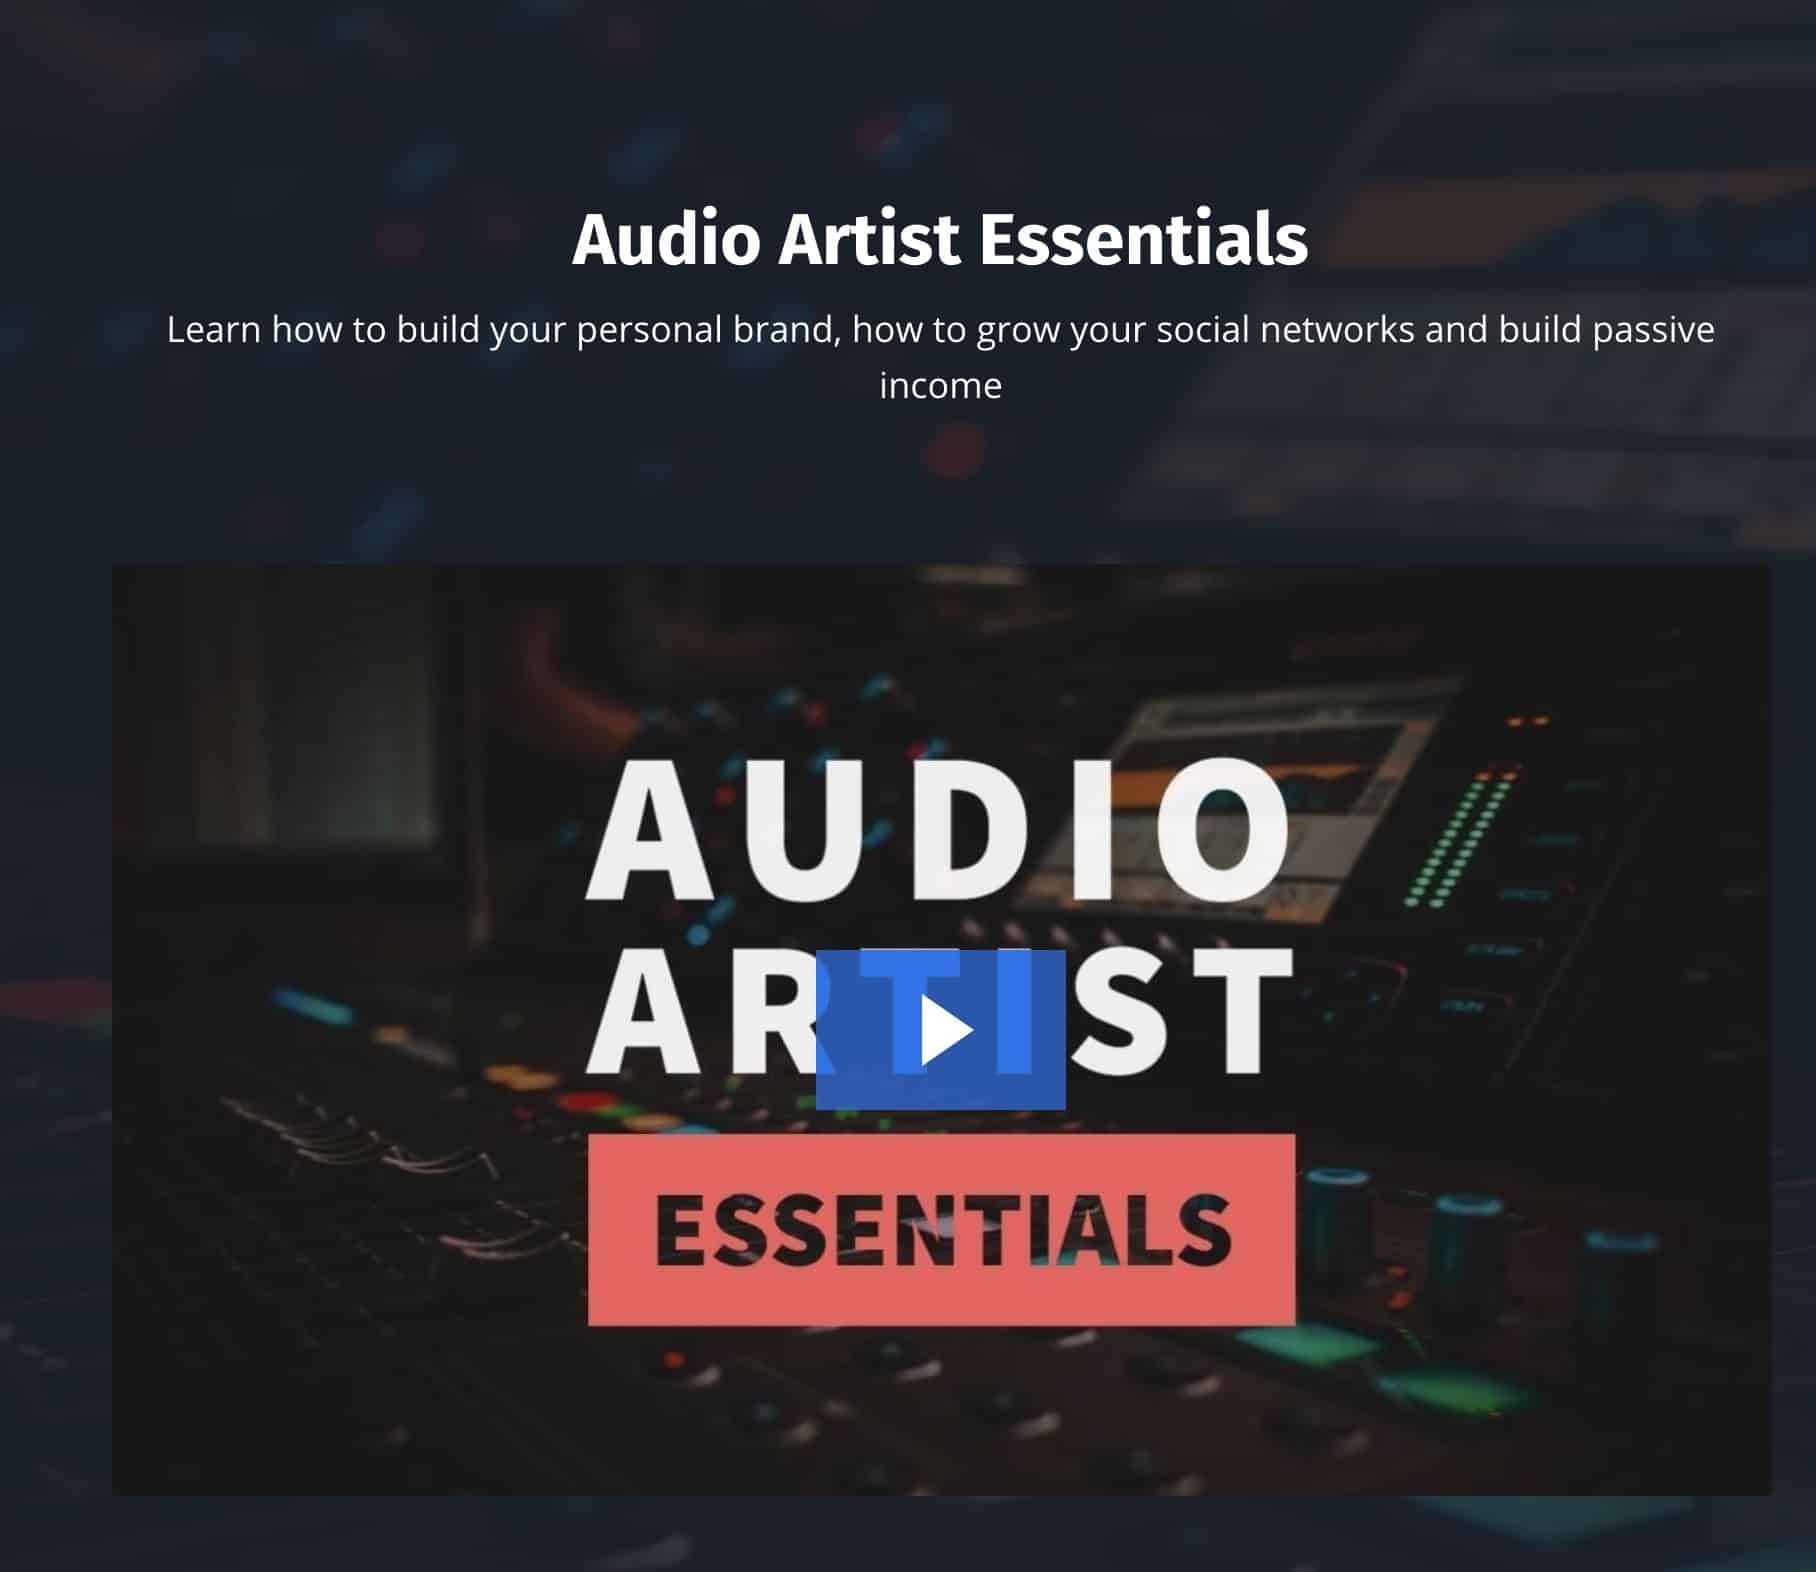 Audio-Artist-Essentials-Course-Available-Now-Title